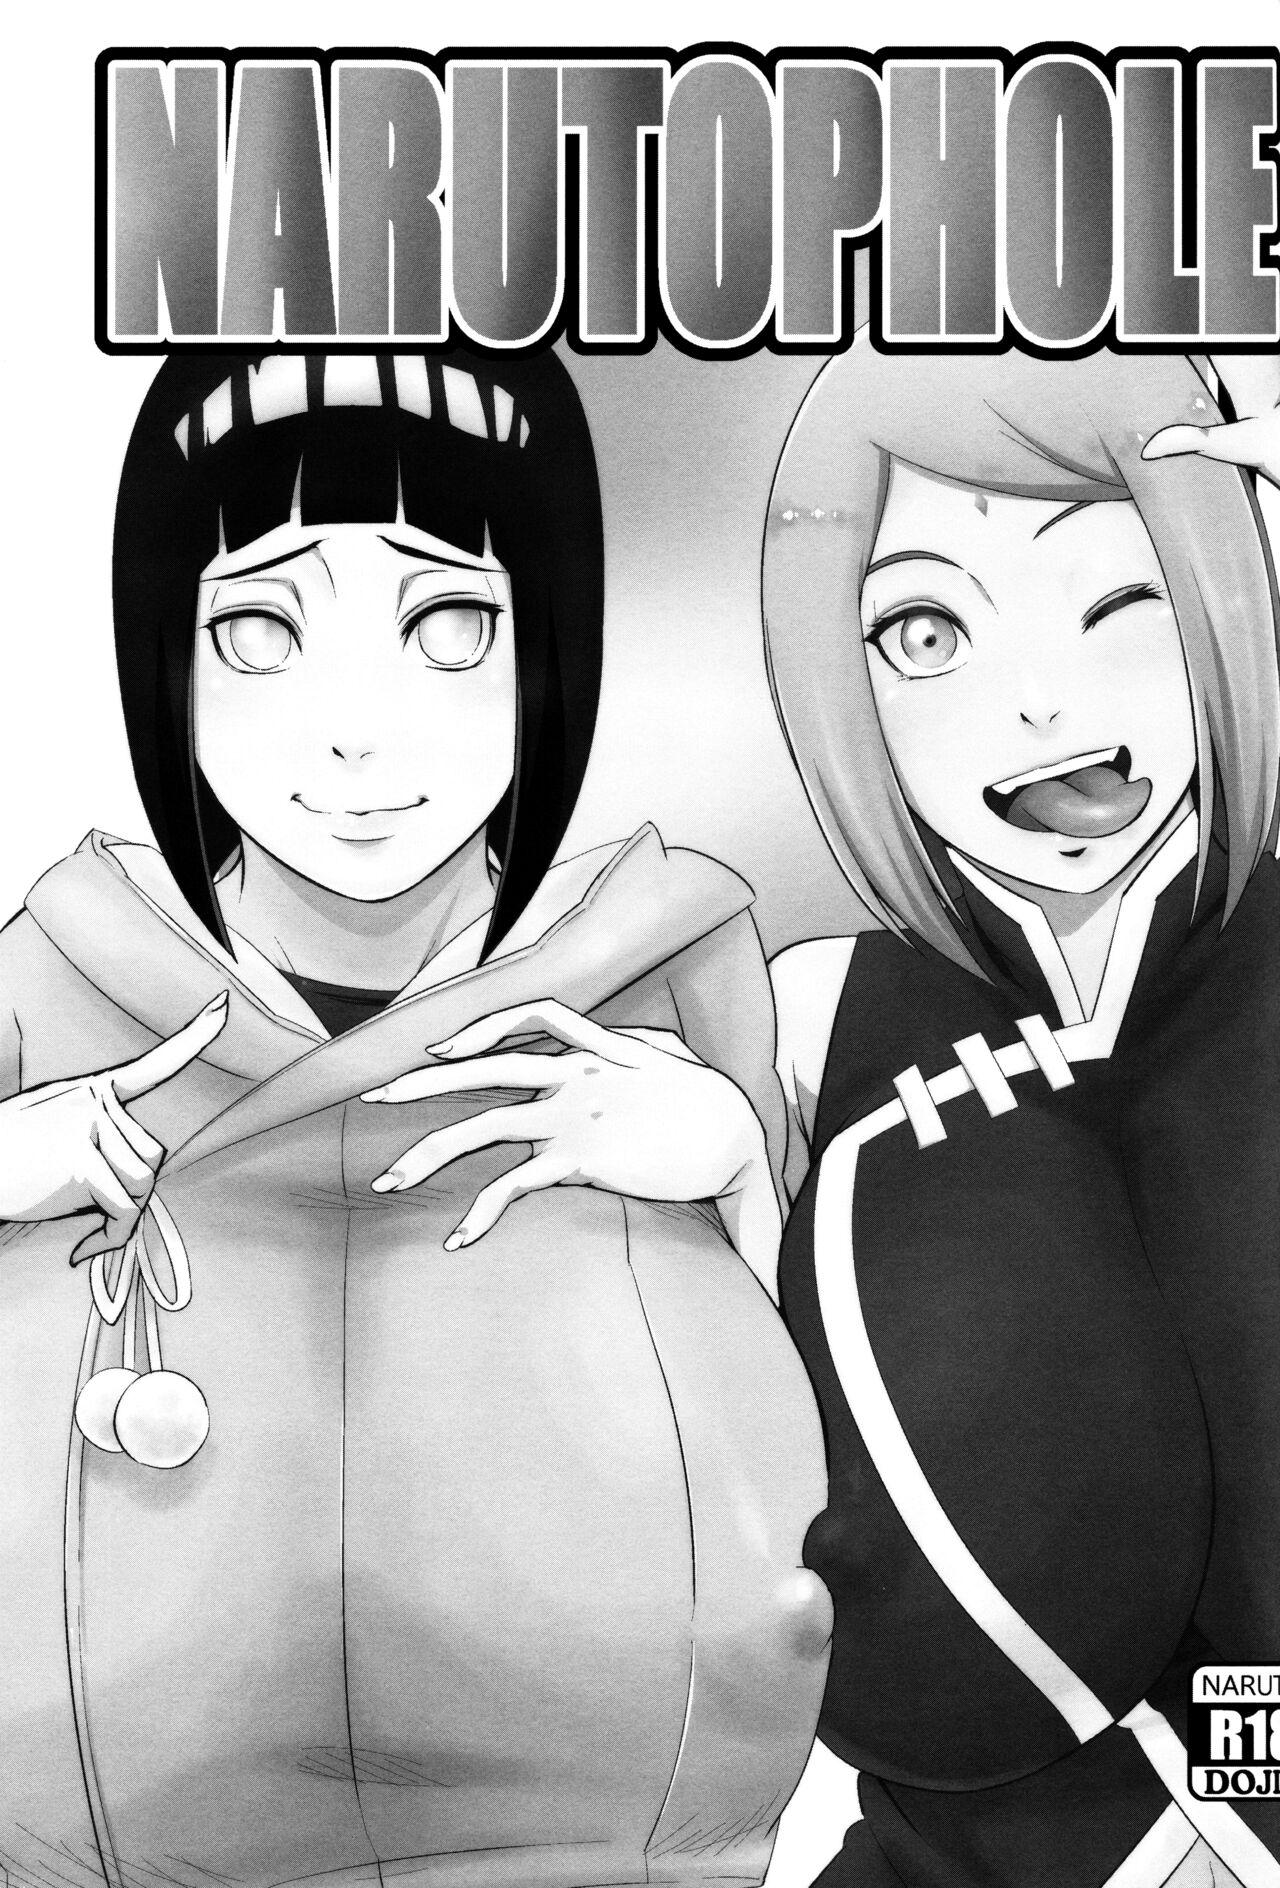 Scissoring NARUTOPHOLE - Naruto Hot Girls Getting Fucked - Page 2